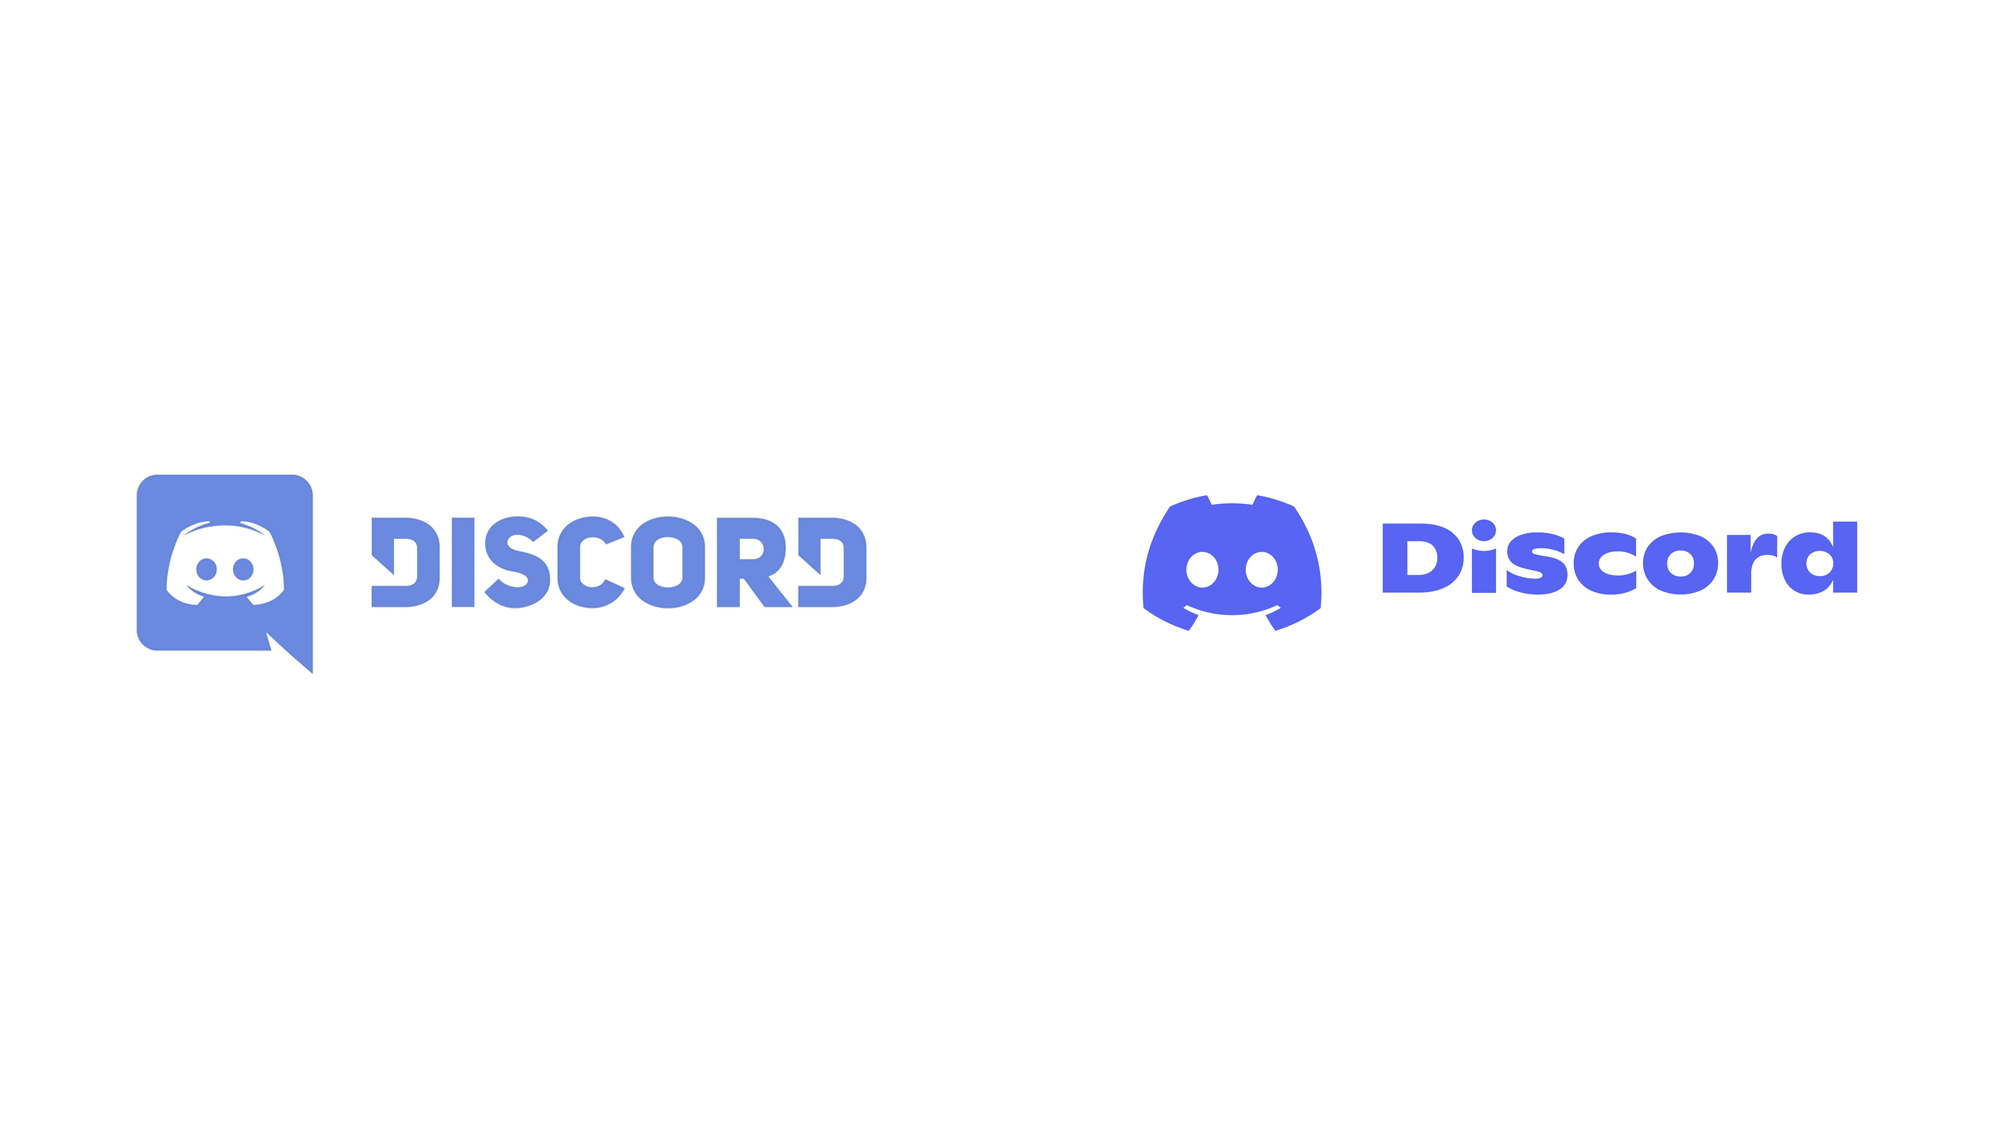 Brand New: New Logo and Identity for Discord by Koto, AKQA, and In-house